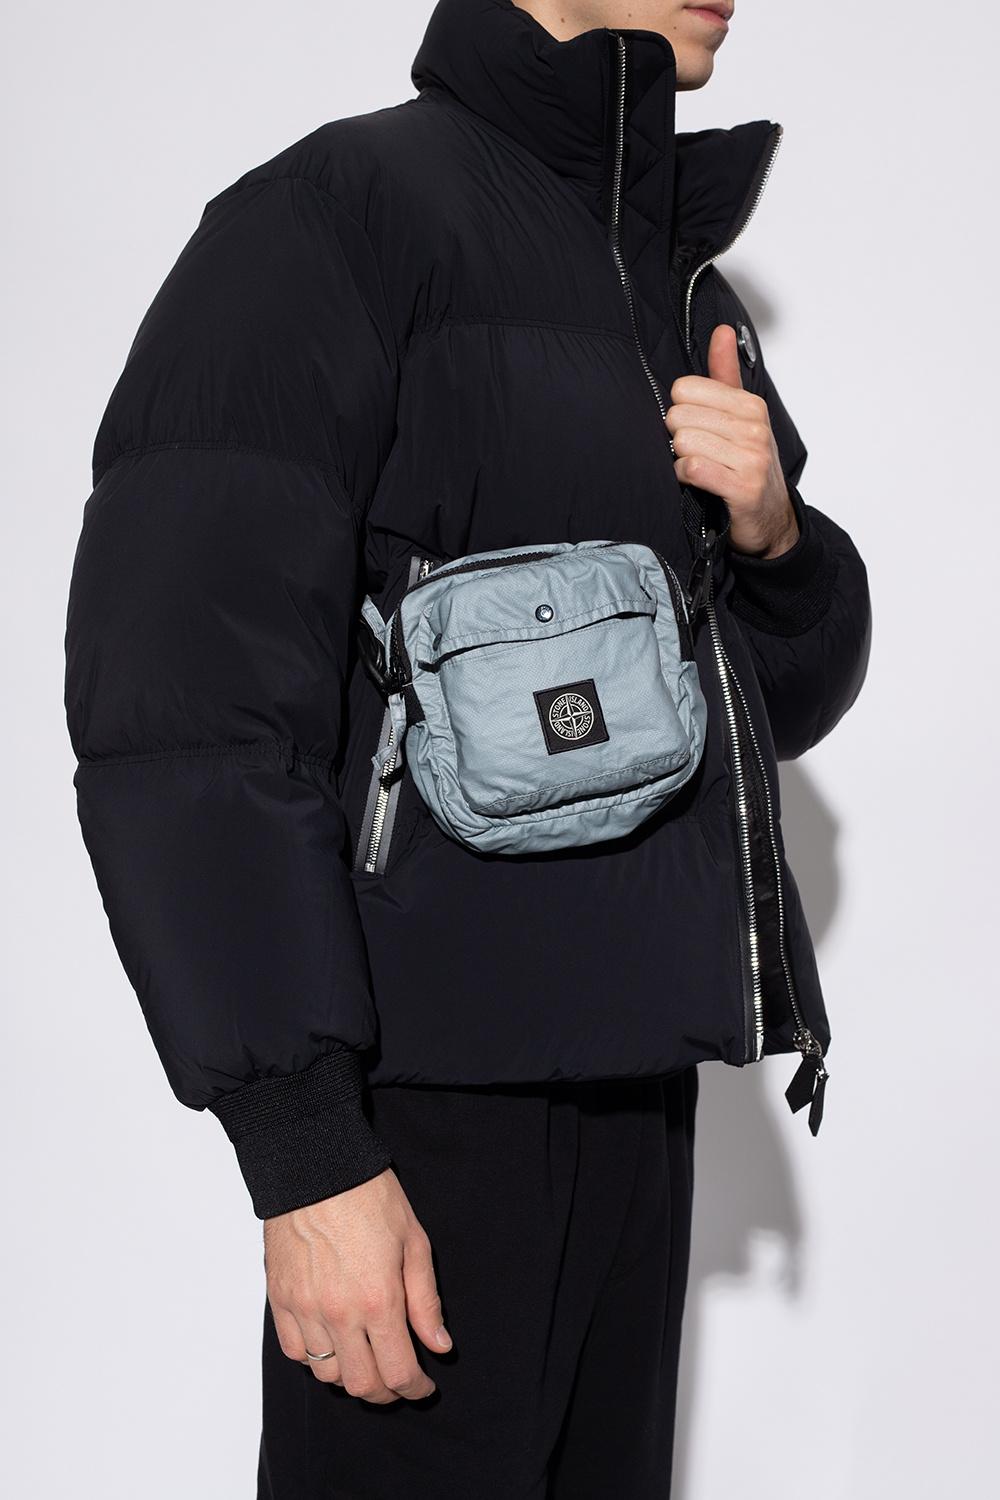 Stone Island Shoulder Bag With Logo in Grey (Gray) for Men | Lyst